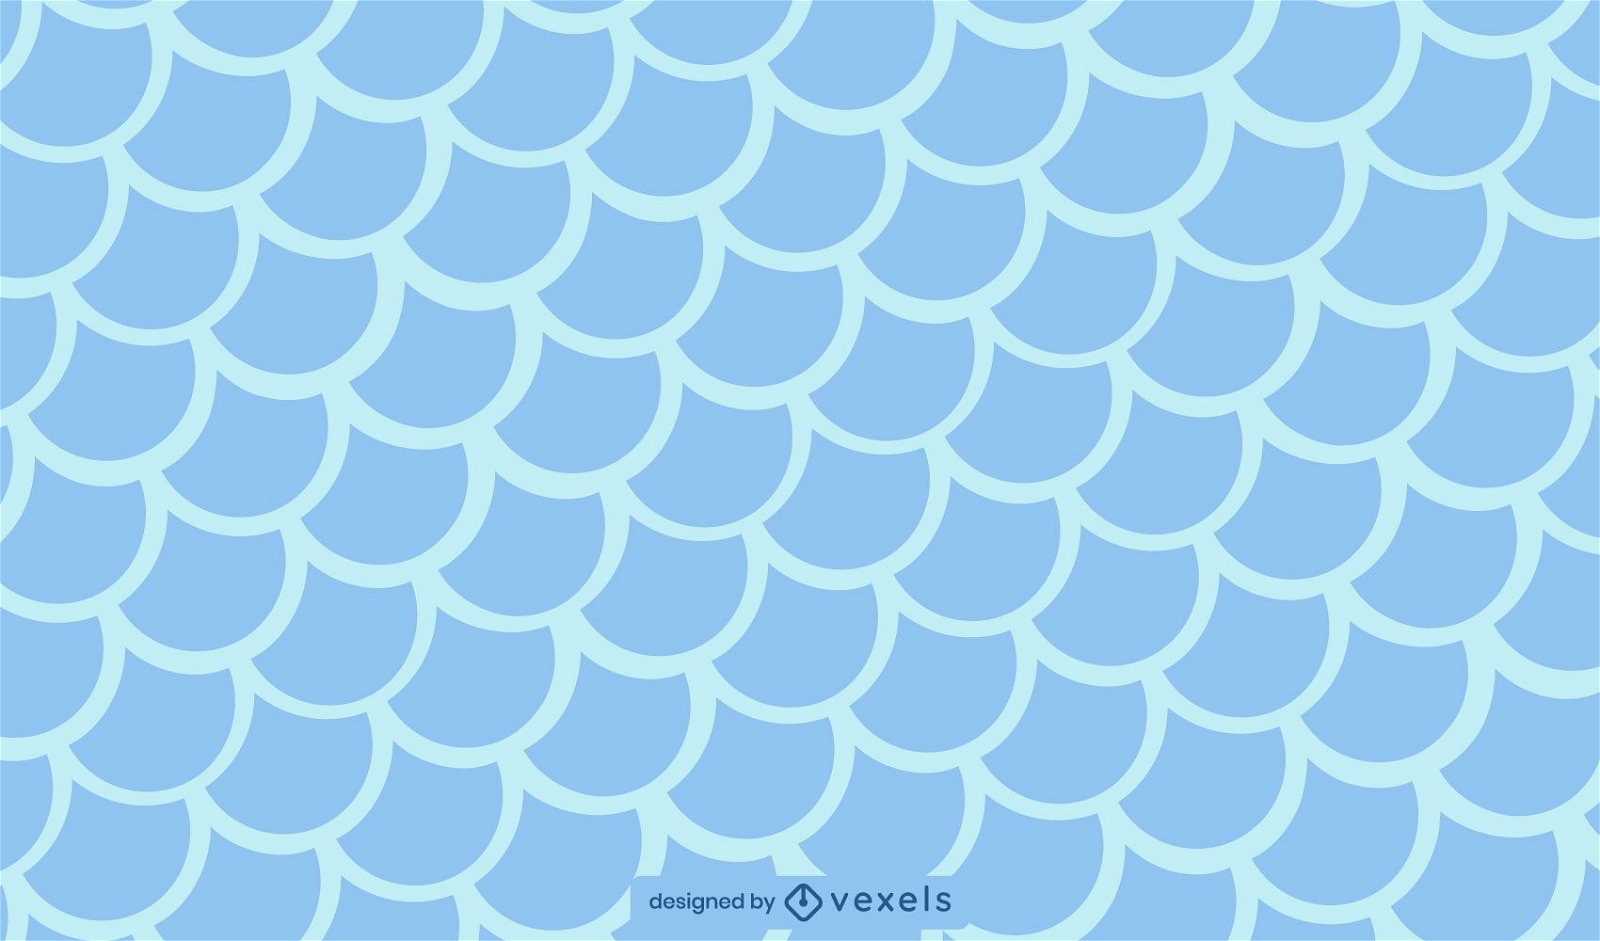 Fish scales texture pattern